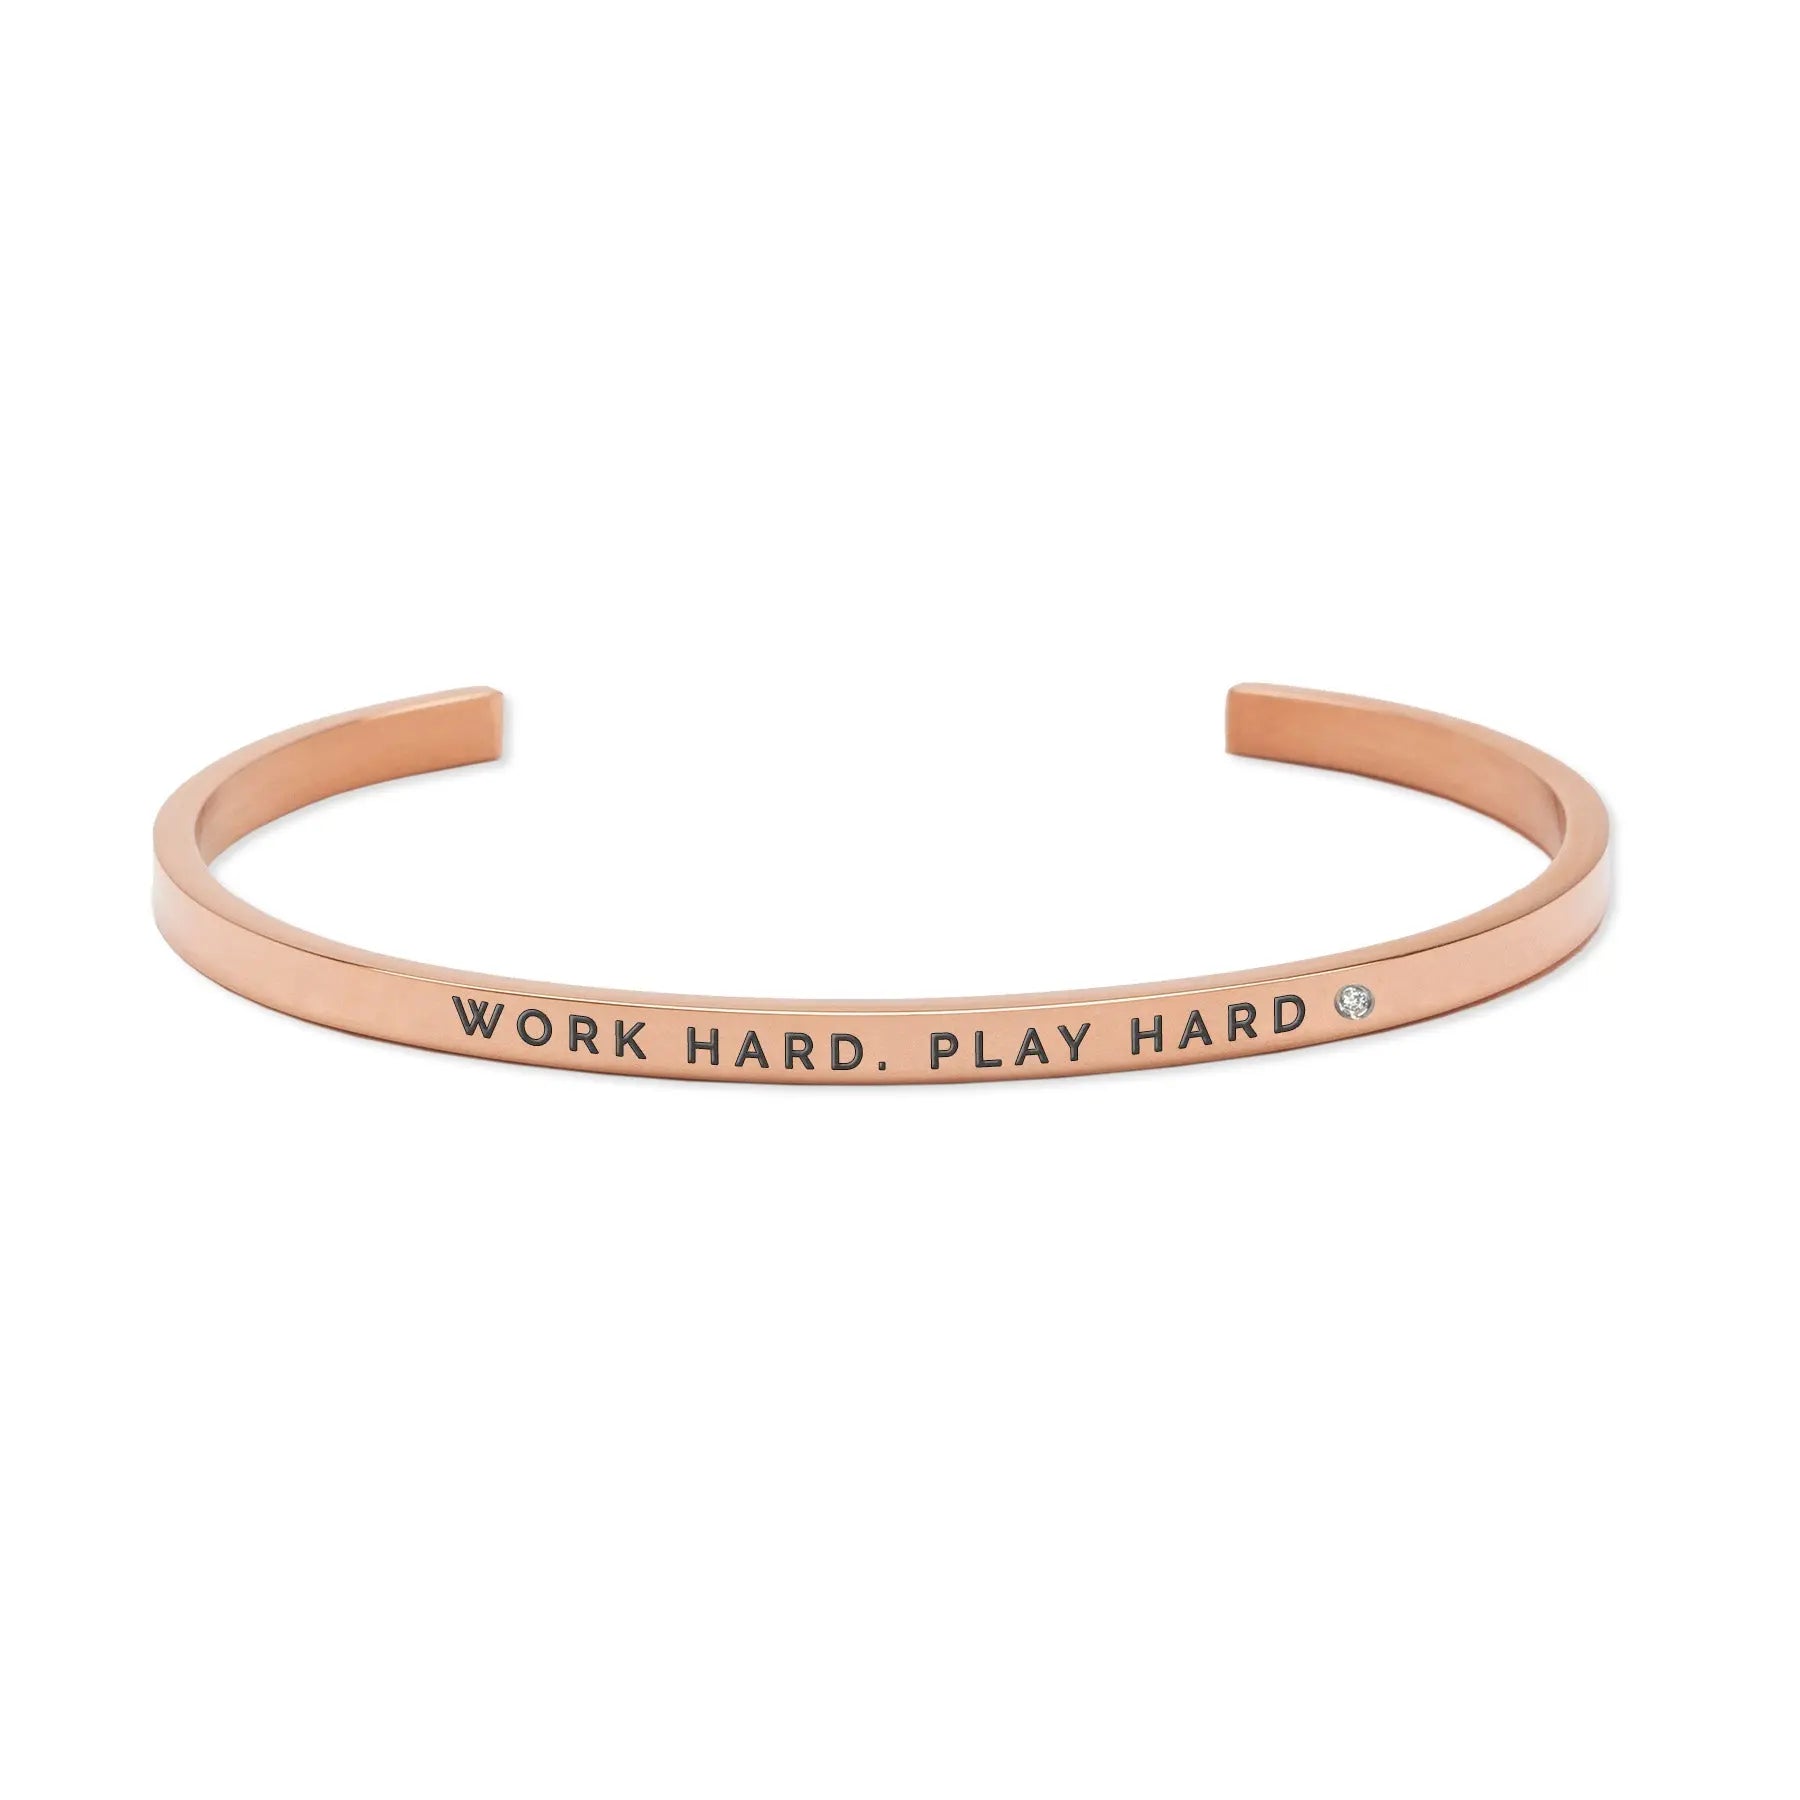 Adjustable gold bracelet engraved with Work Hard. Play Hard. Durable stainless steel, 3mm width. Polished finish, deep engraving for long-lasting style.